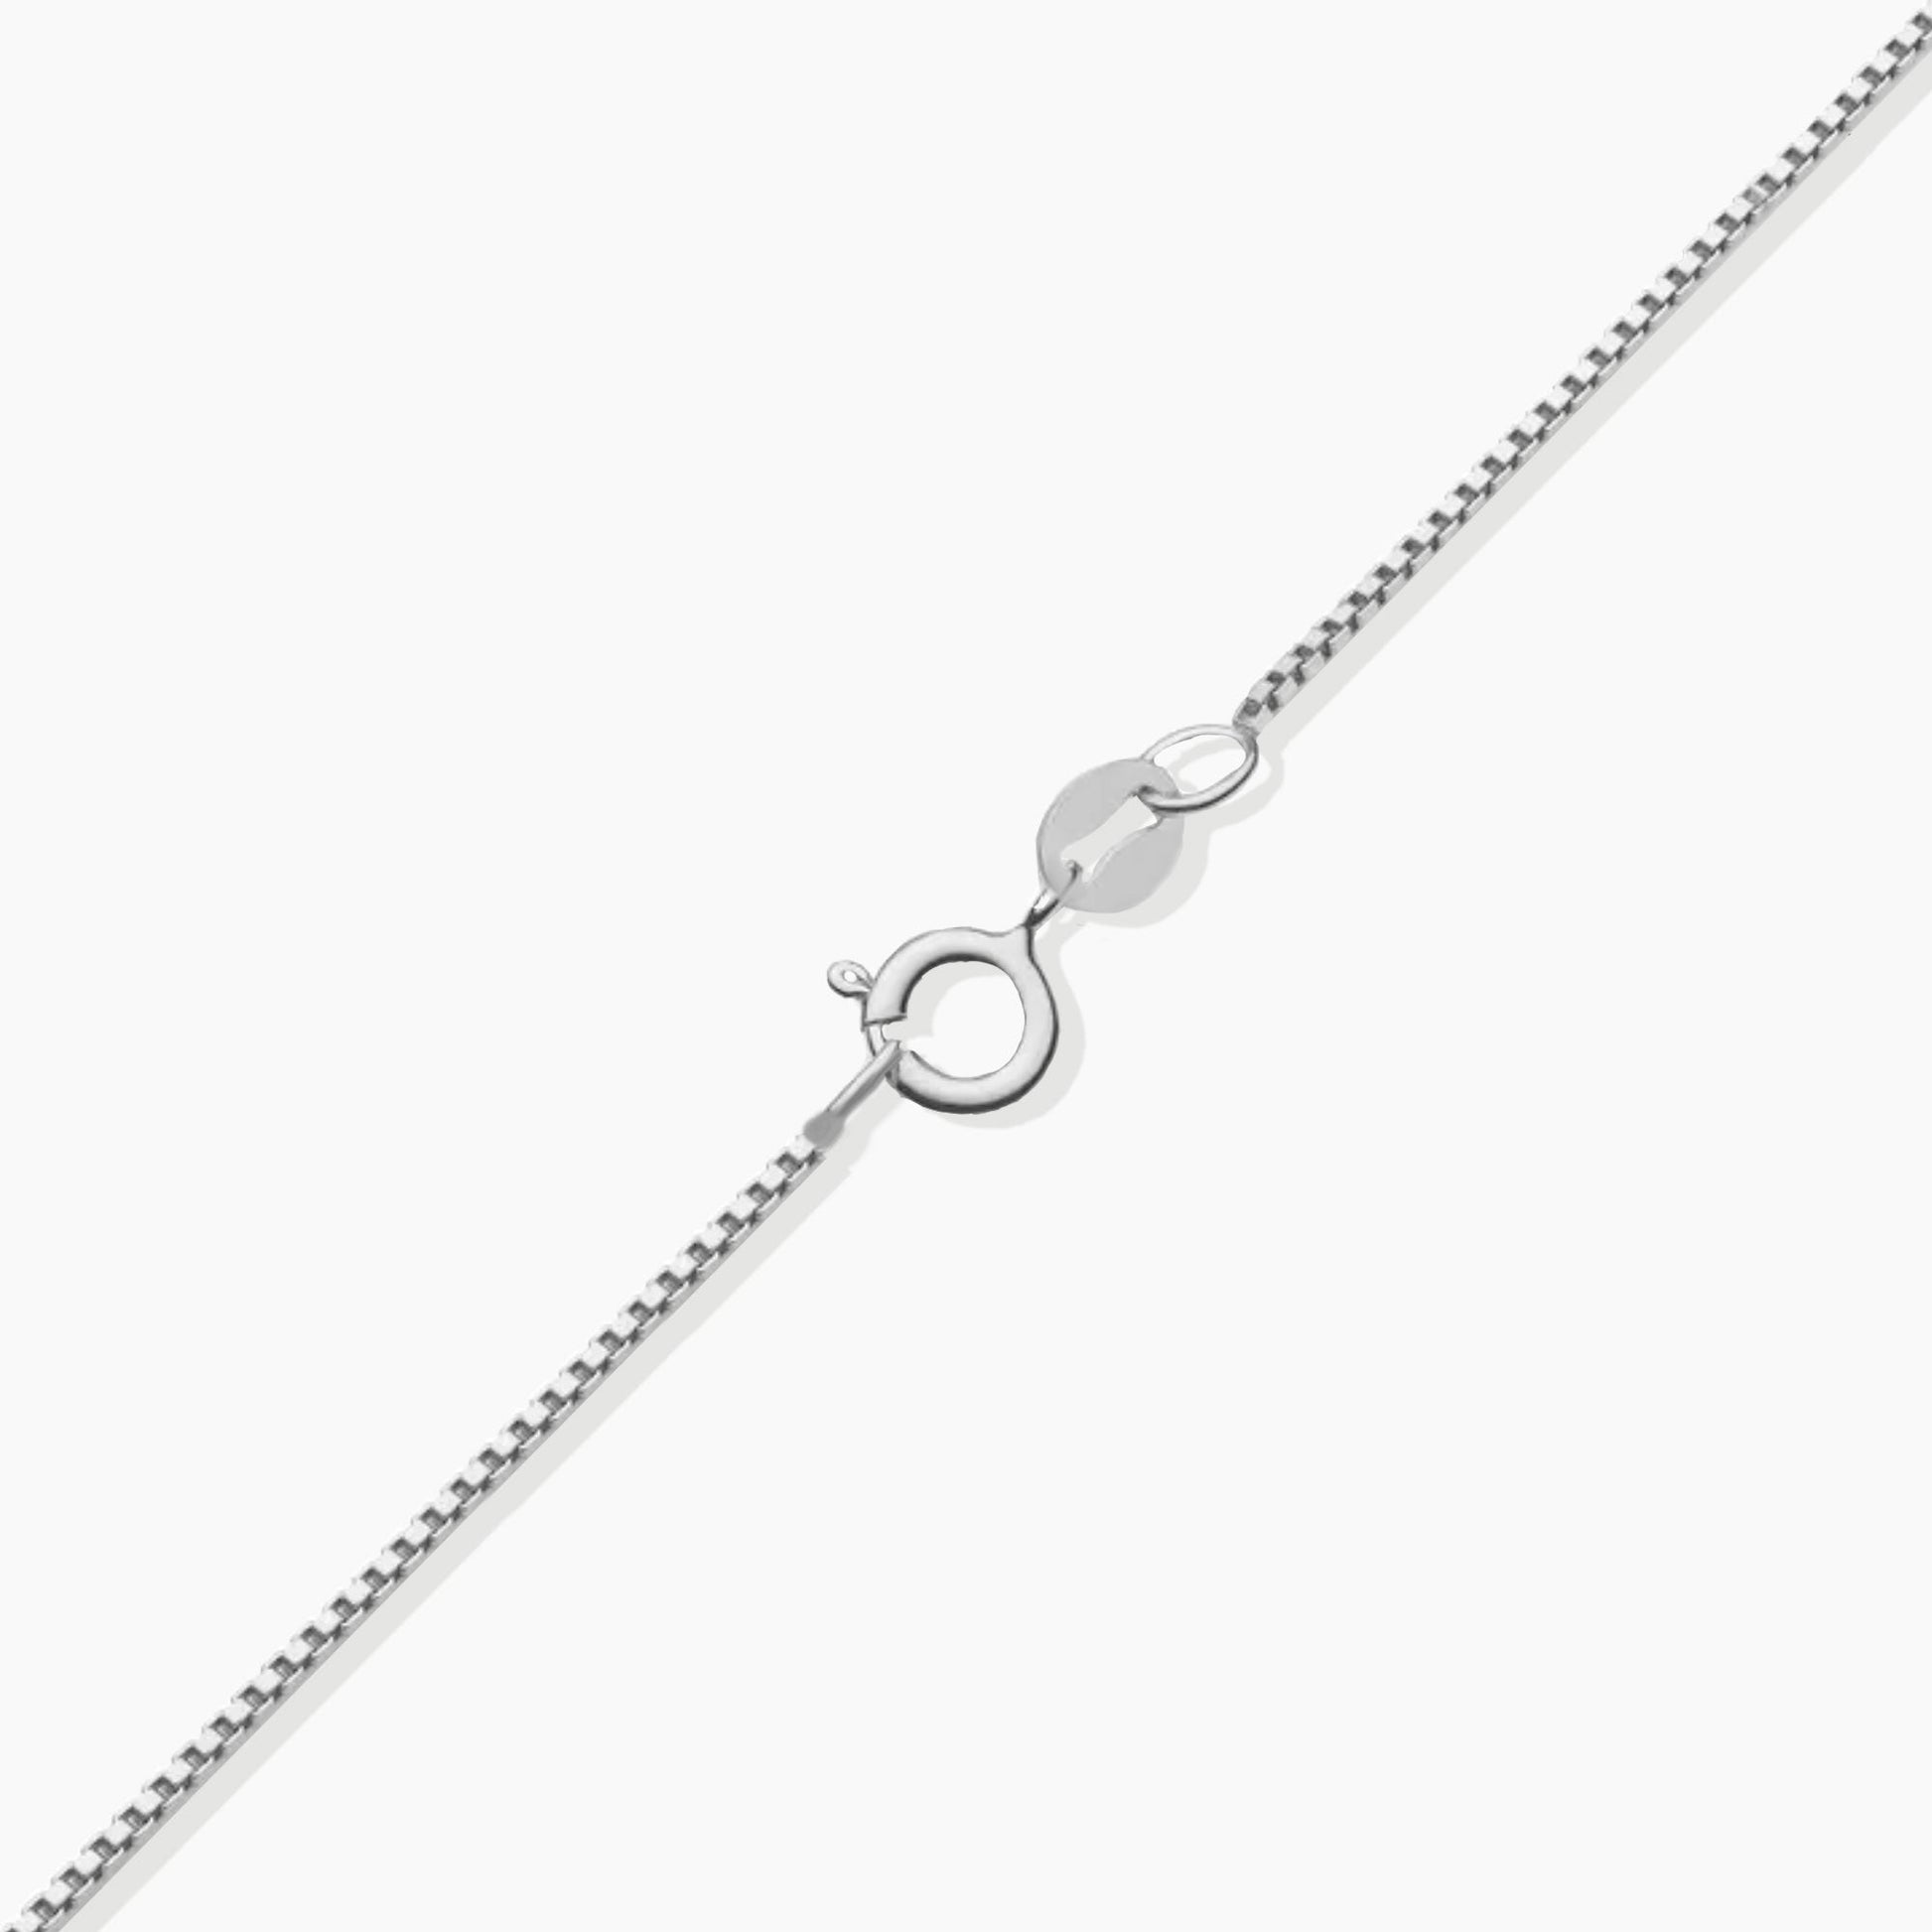 Sterling silver chain with spring clasp for London Blue Topaz Dewdrop Pendant